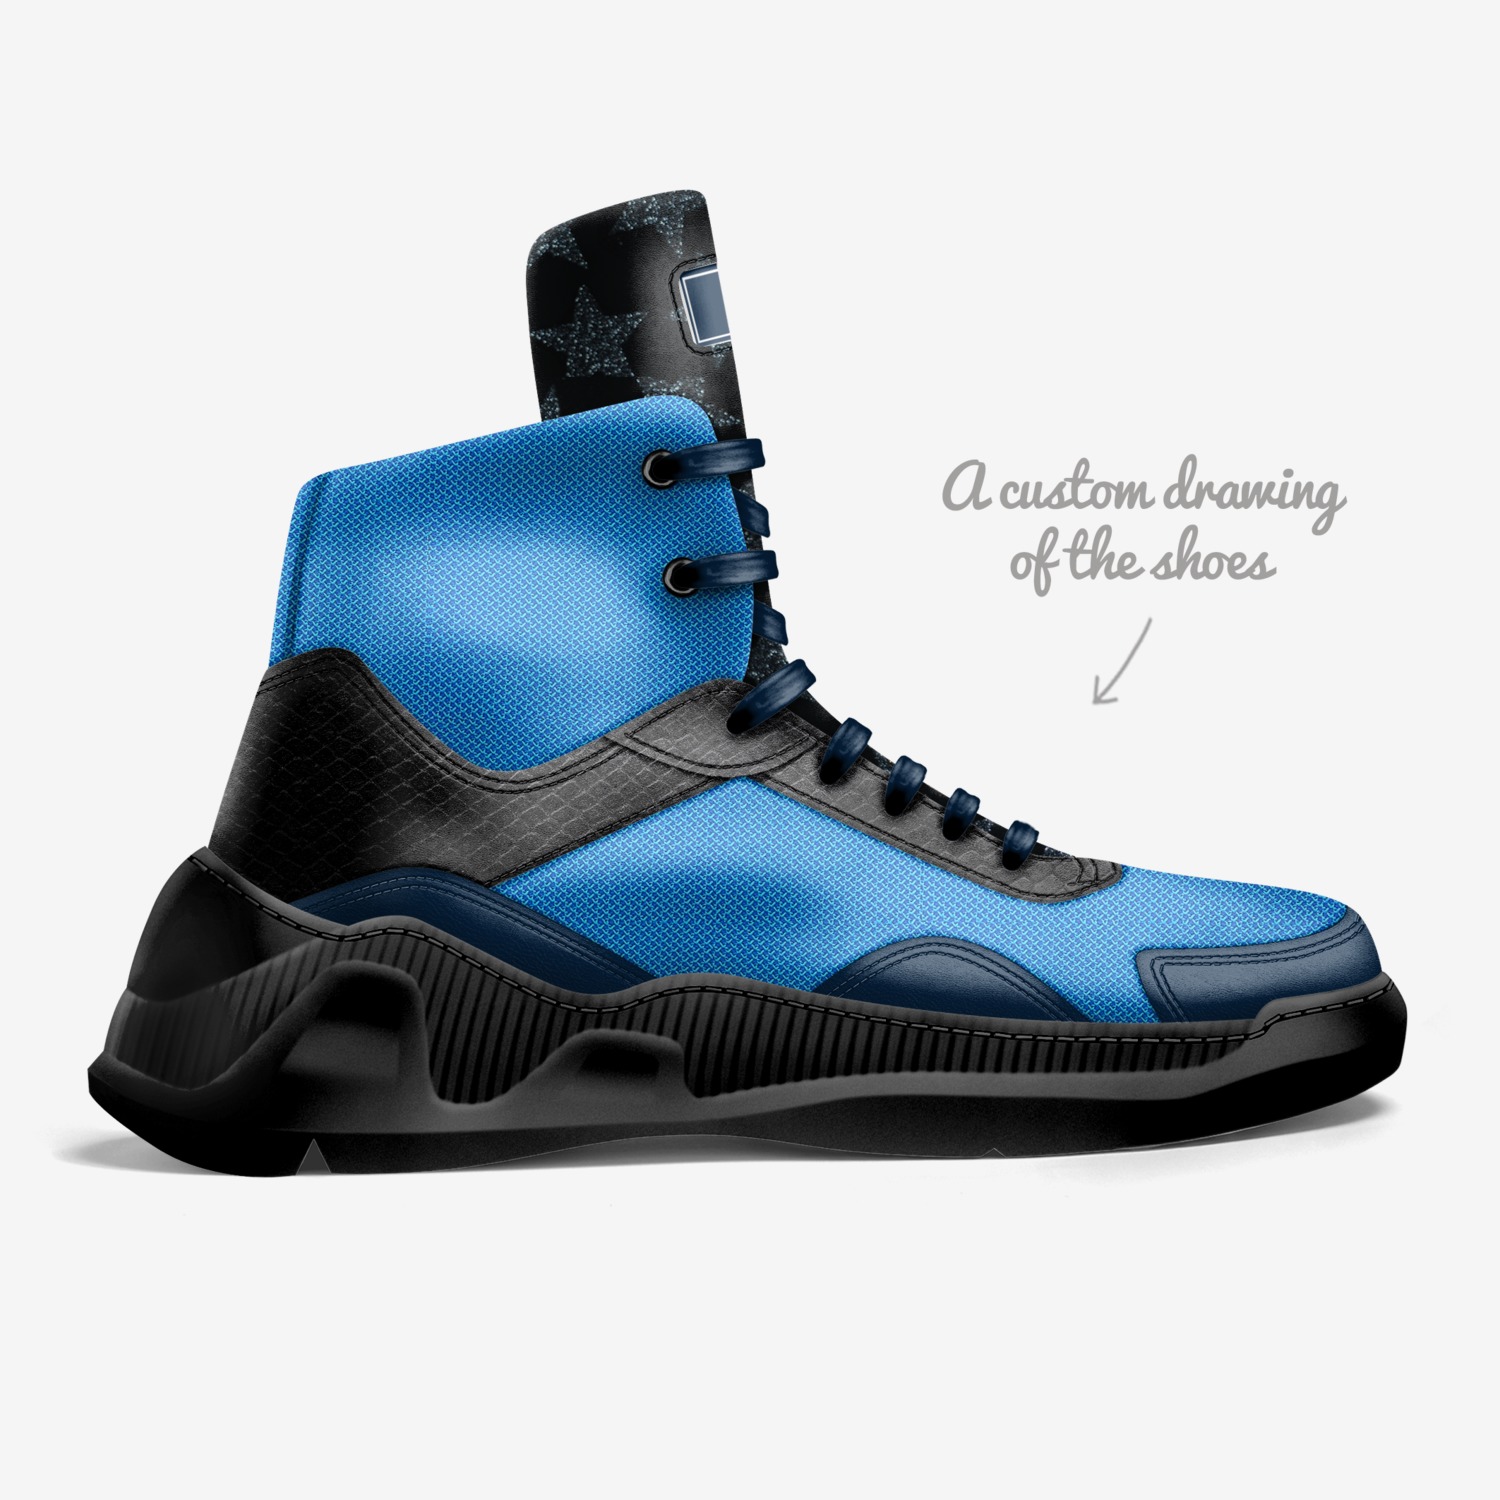 Malcolm | A Custom Shoe concept by Toniece Lurch